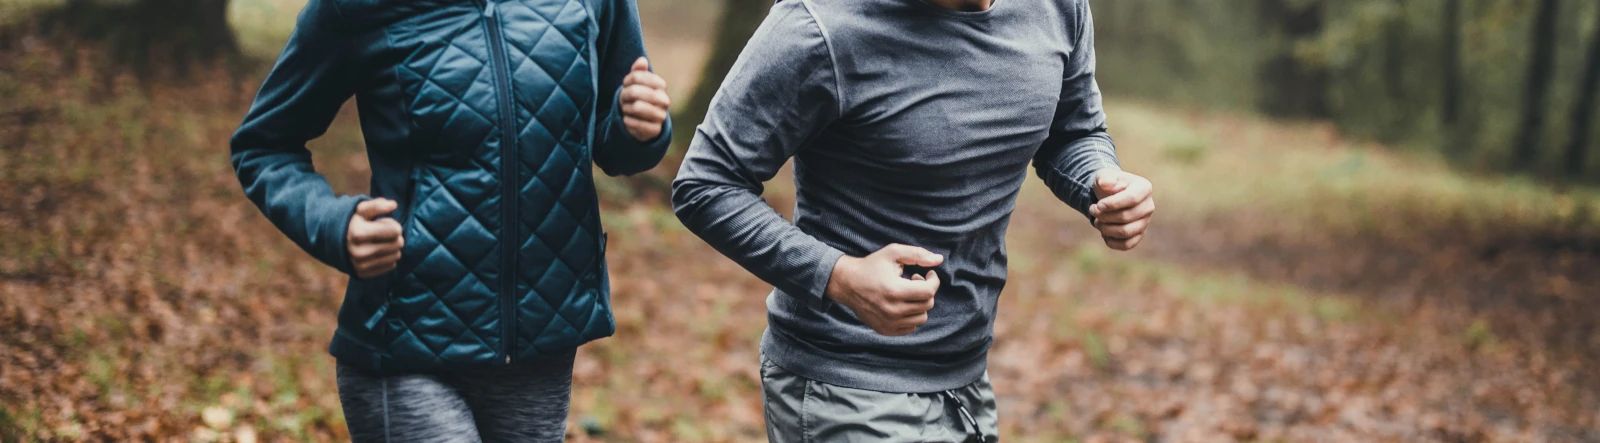 The torsos of two people running in the woods